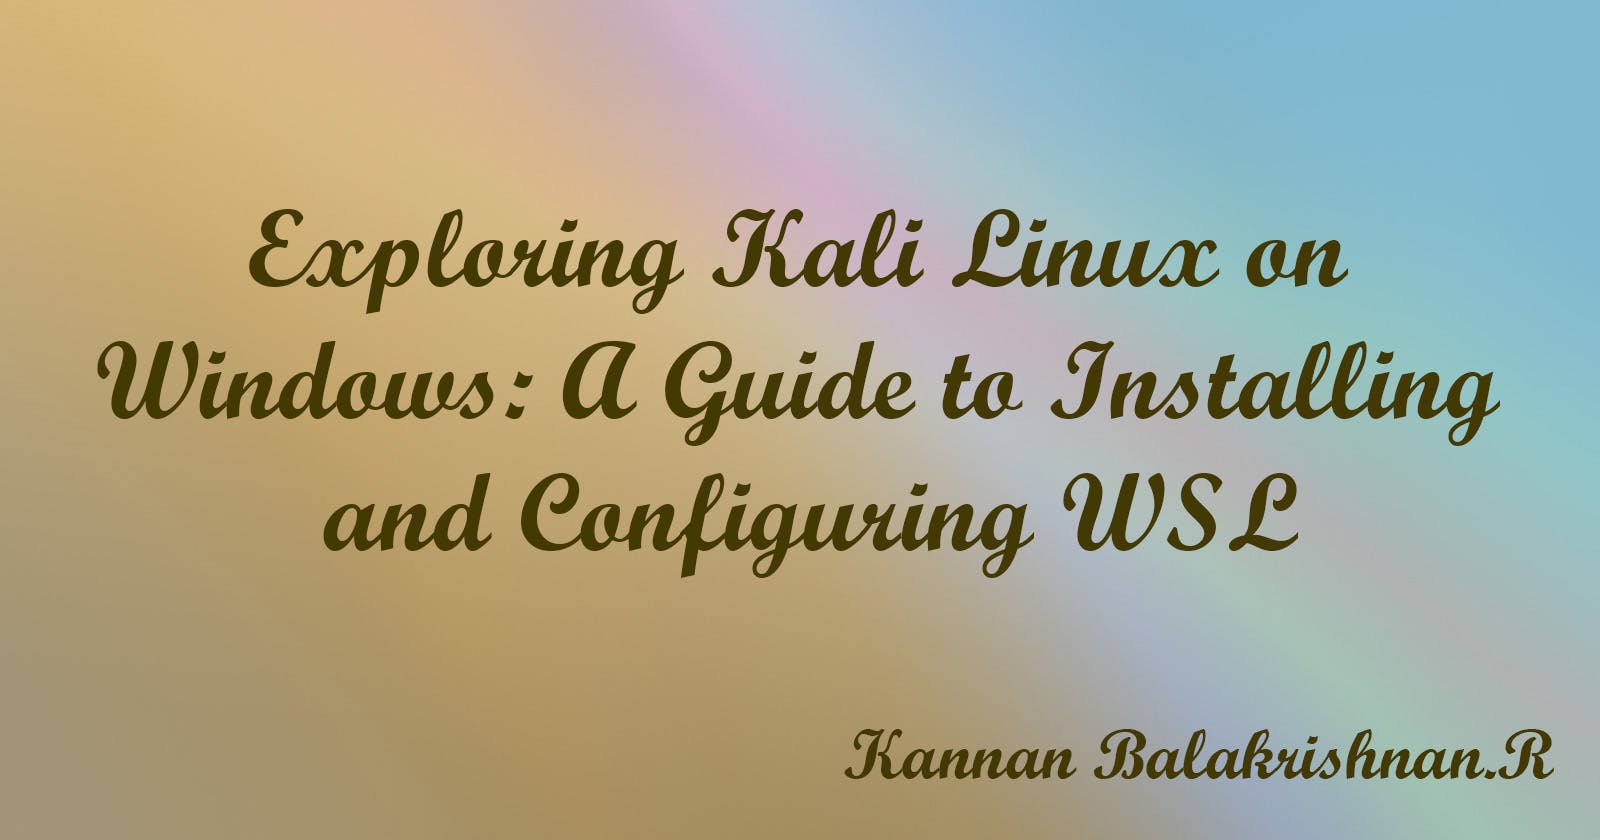 Exploring Kali Linux on Windows: A Guide to Installing and Configuring WSL